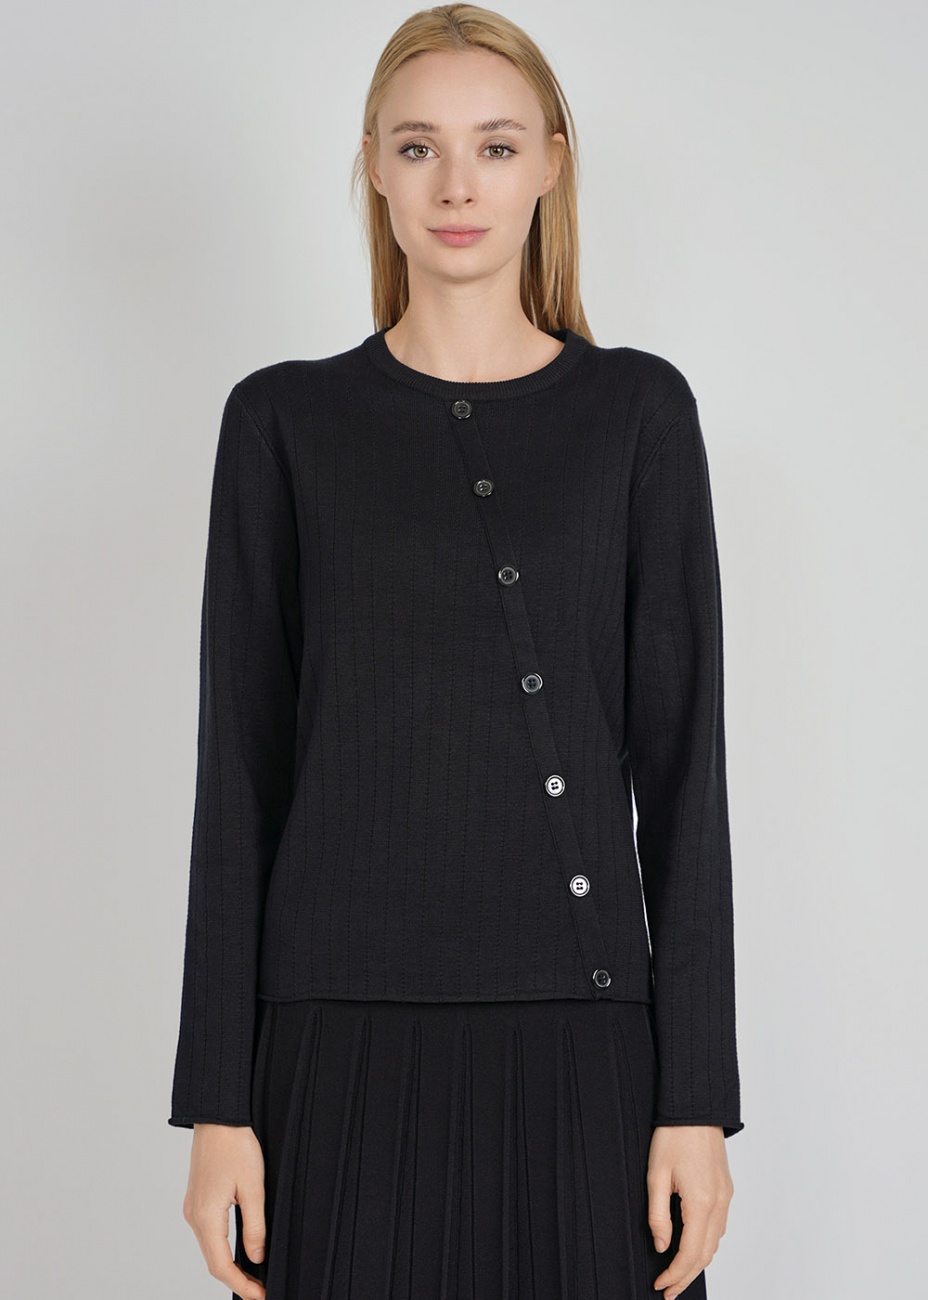 Black Ribbed Crew Neck Sweater With Stylish Buttons